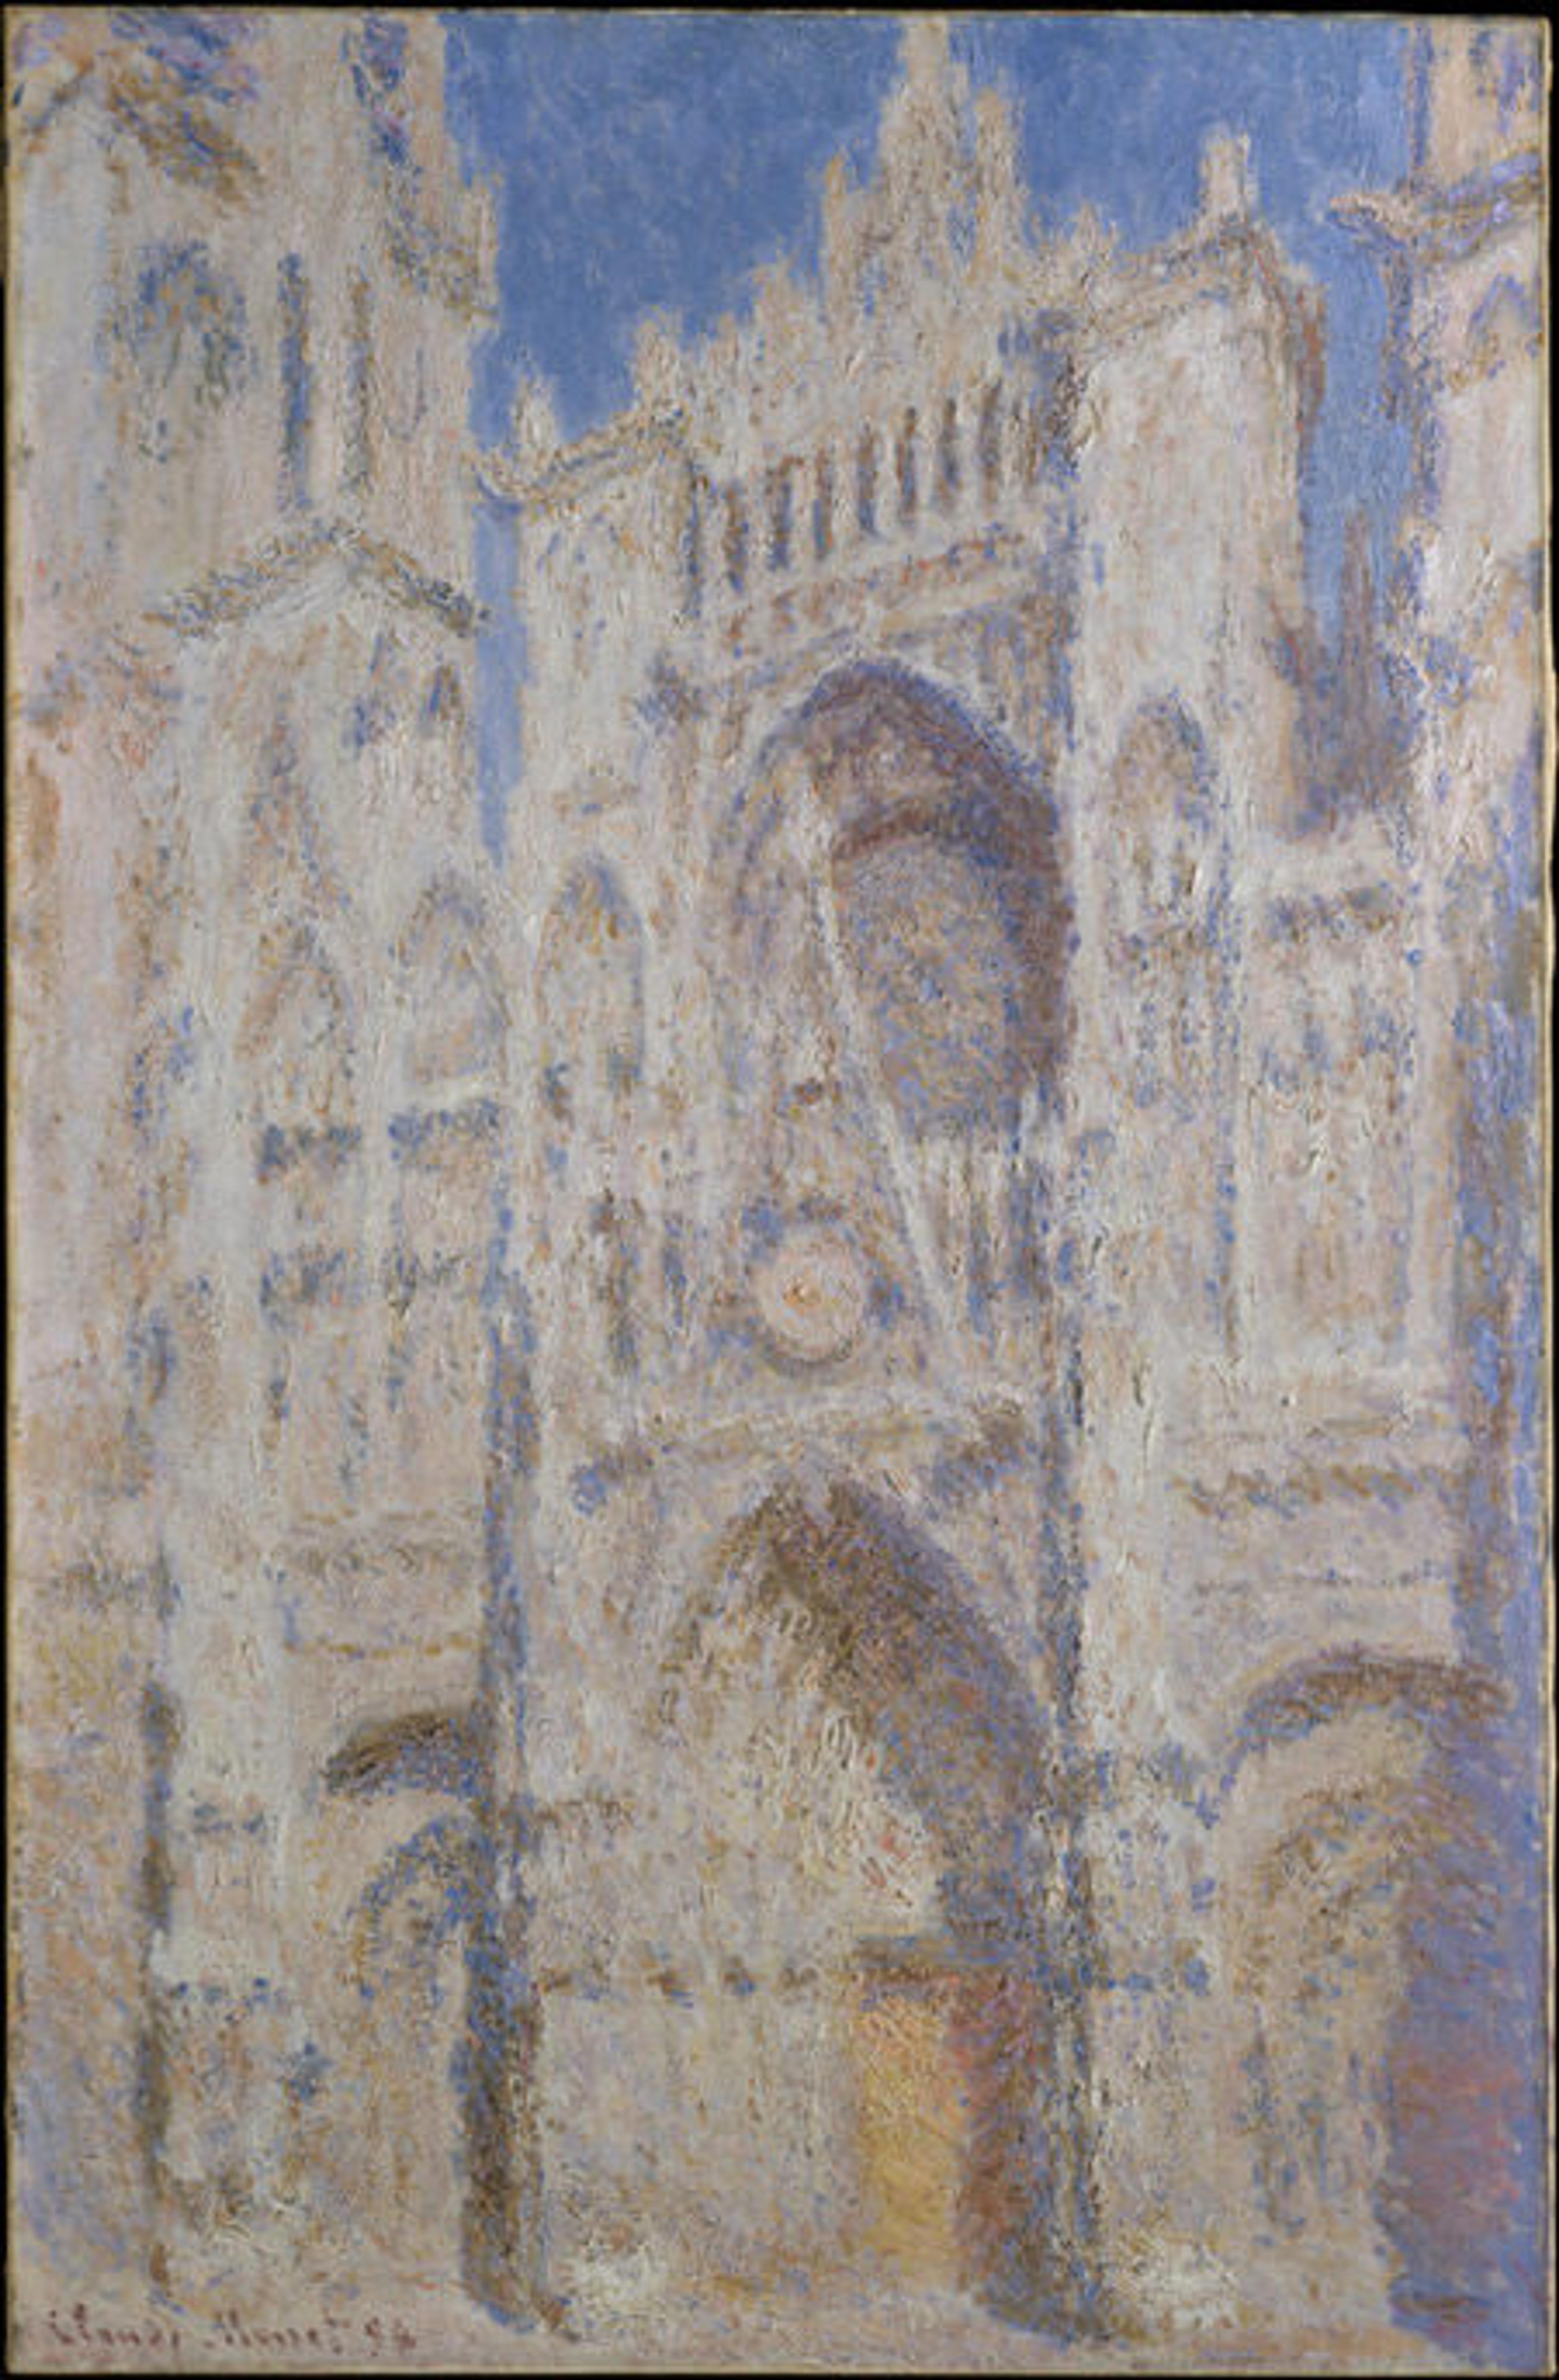 Claude Monet (French, 1840–1926) | Rouen Cathedral: The Portal (Sunlight) | 30.95.250